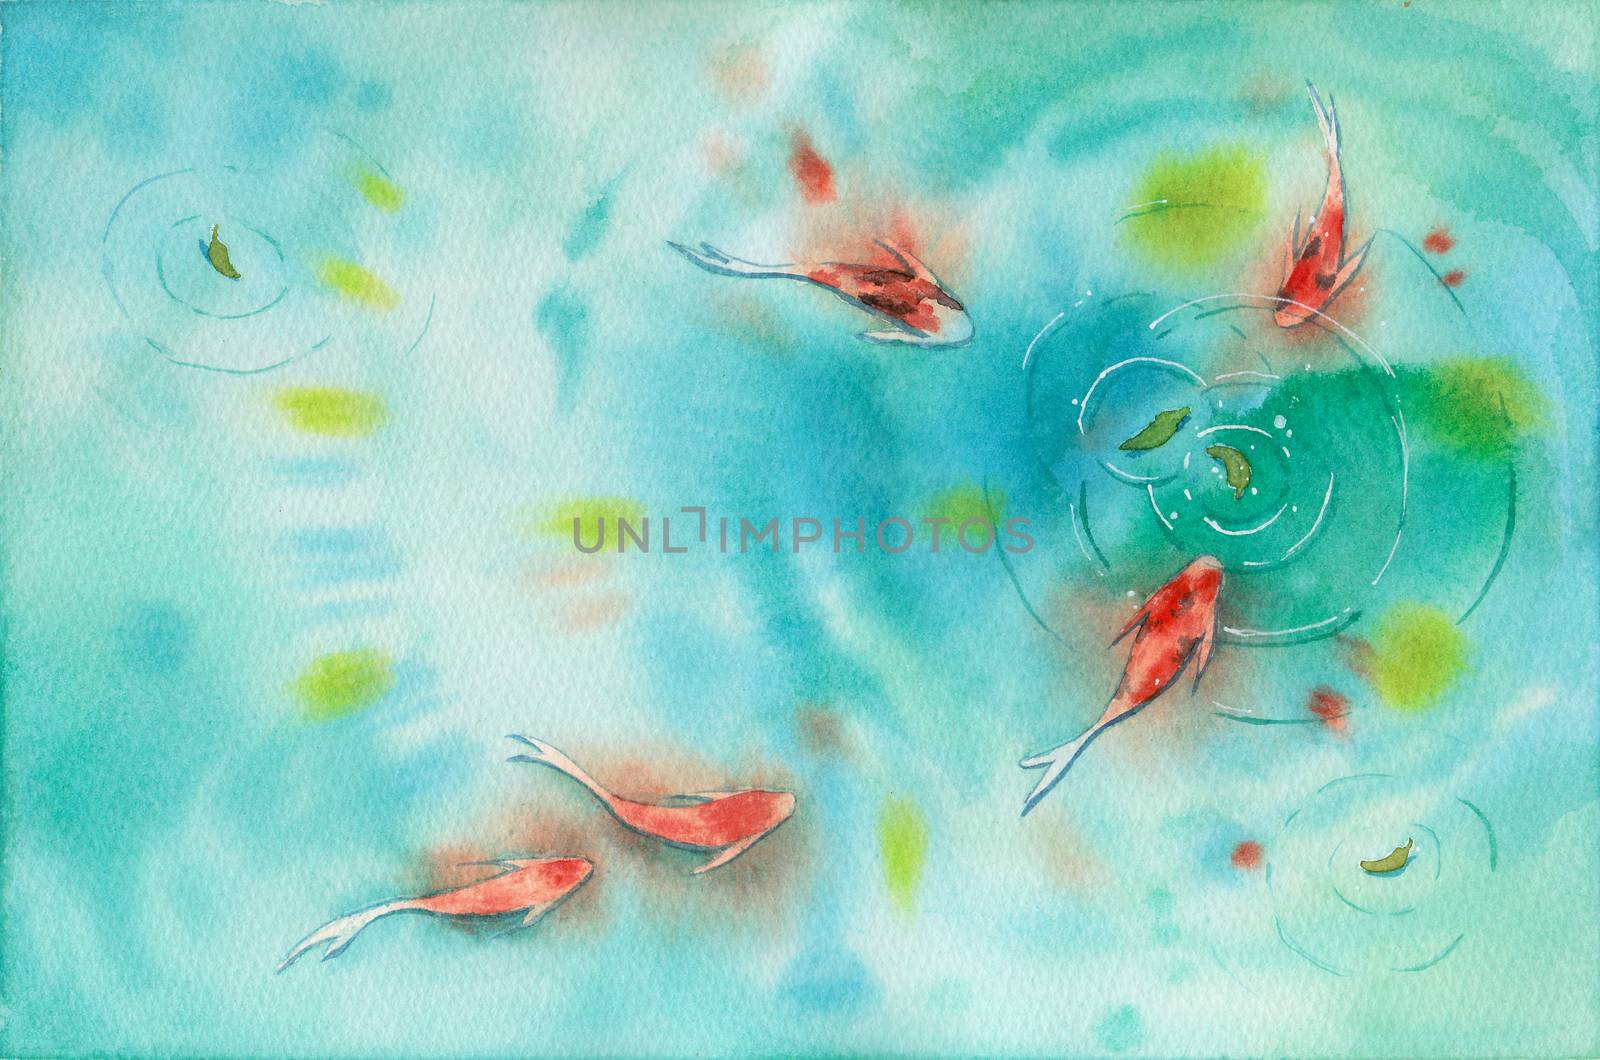 Watercolor hand painting, koi carp fish in pond, symbol of good luck and prosperity